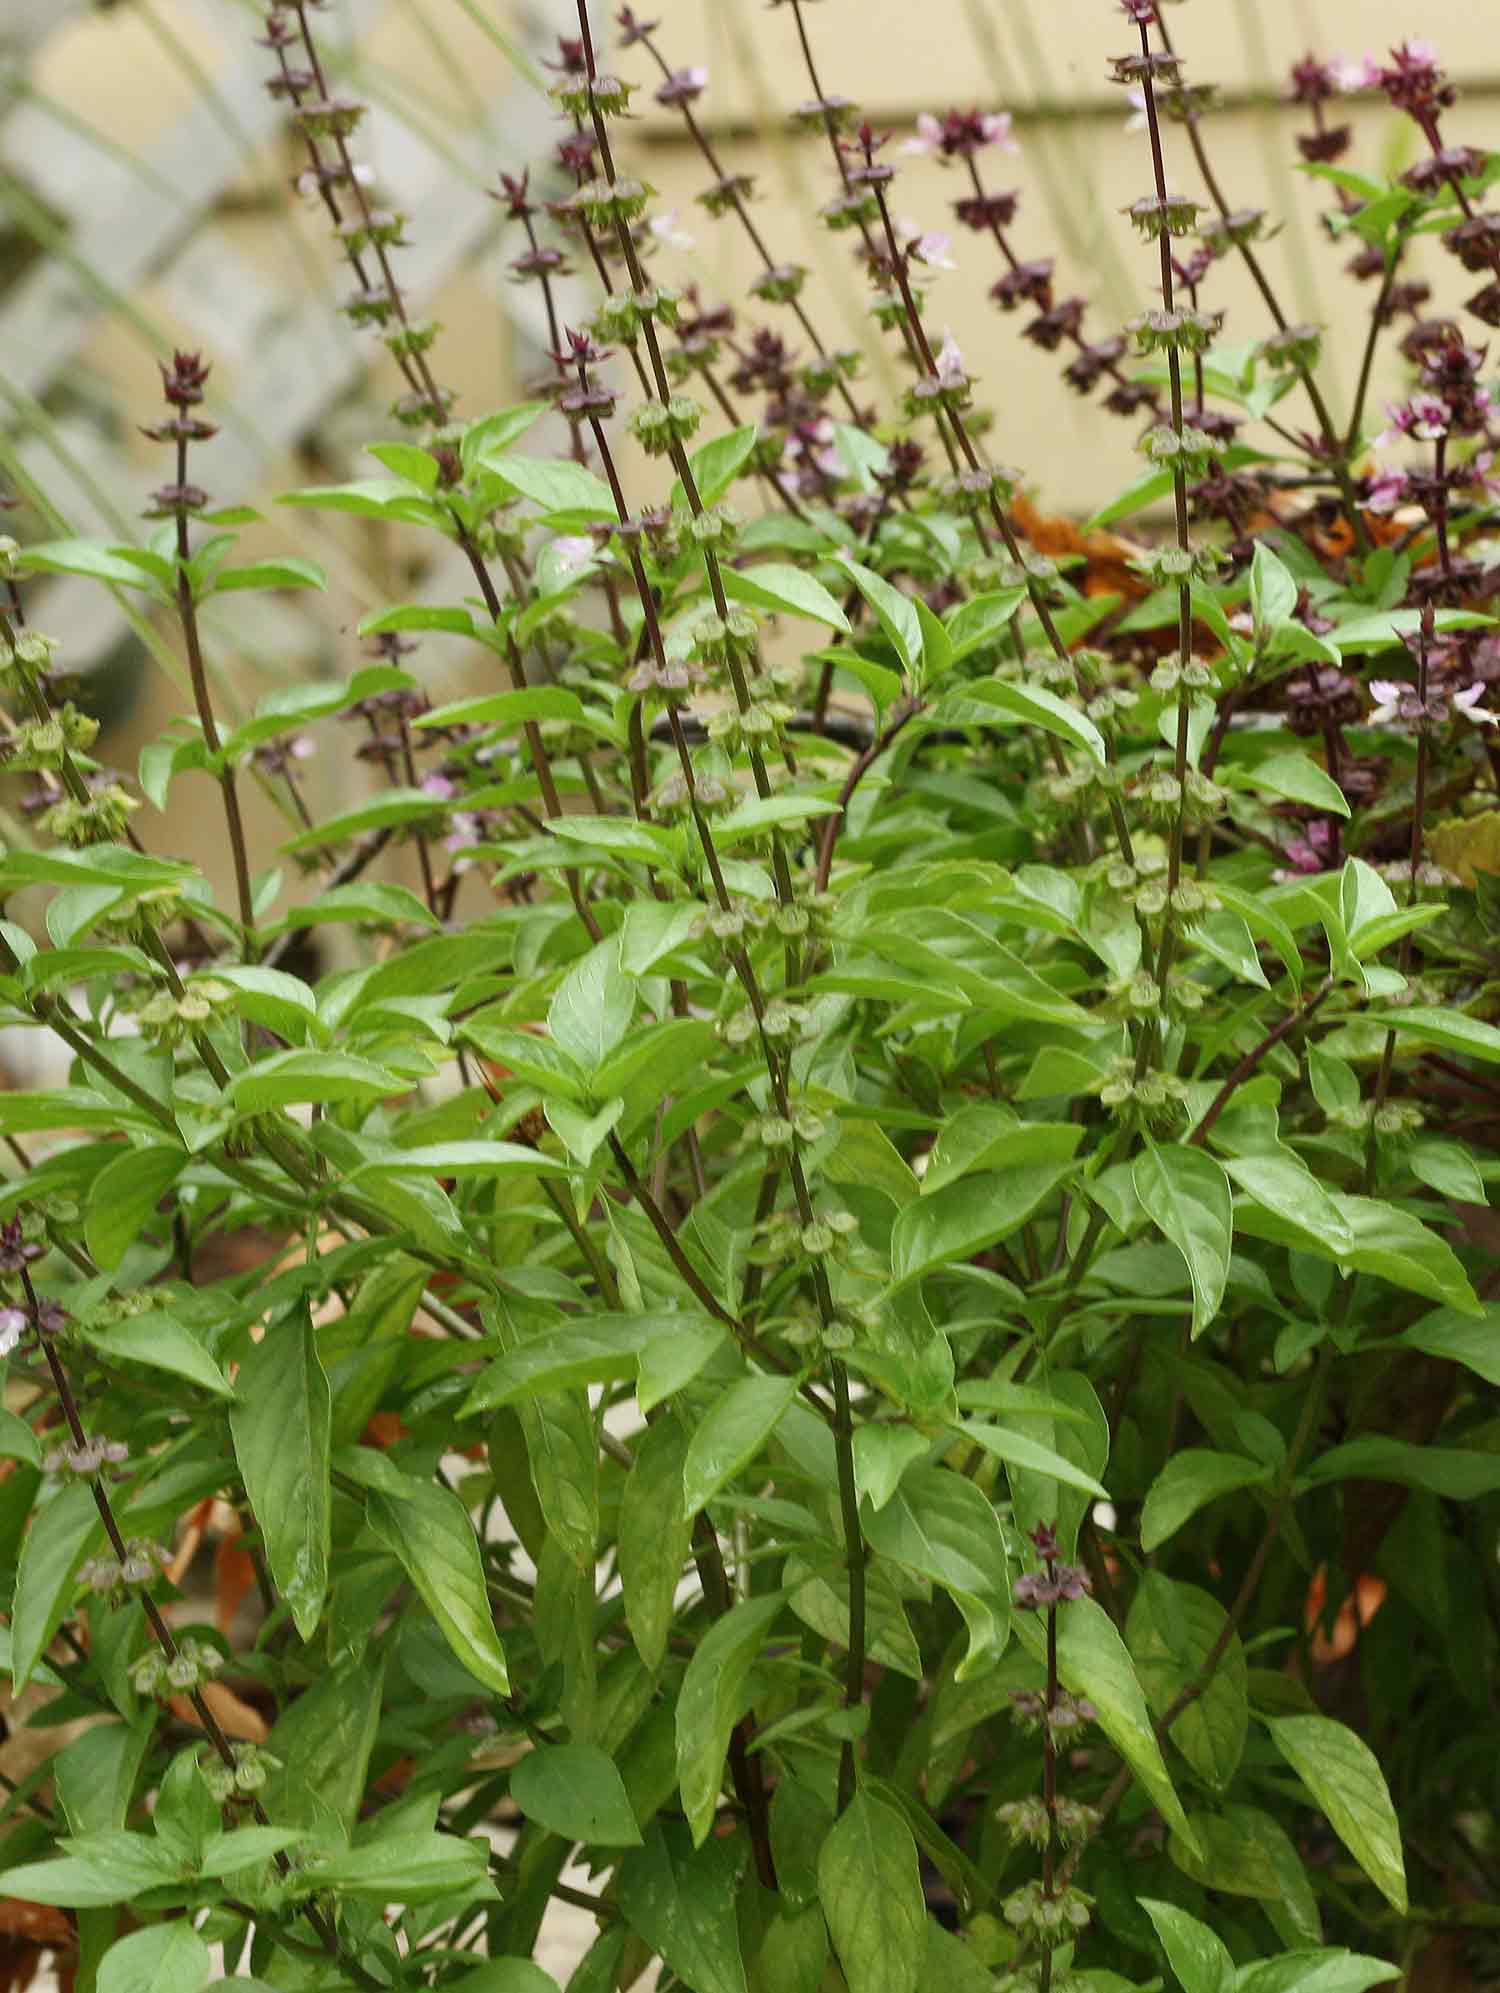 A bed of Thai basil with with purple stems and pink blooms.